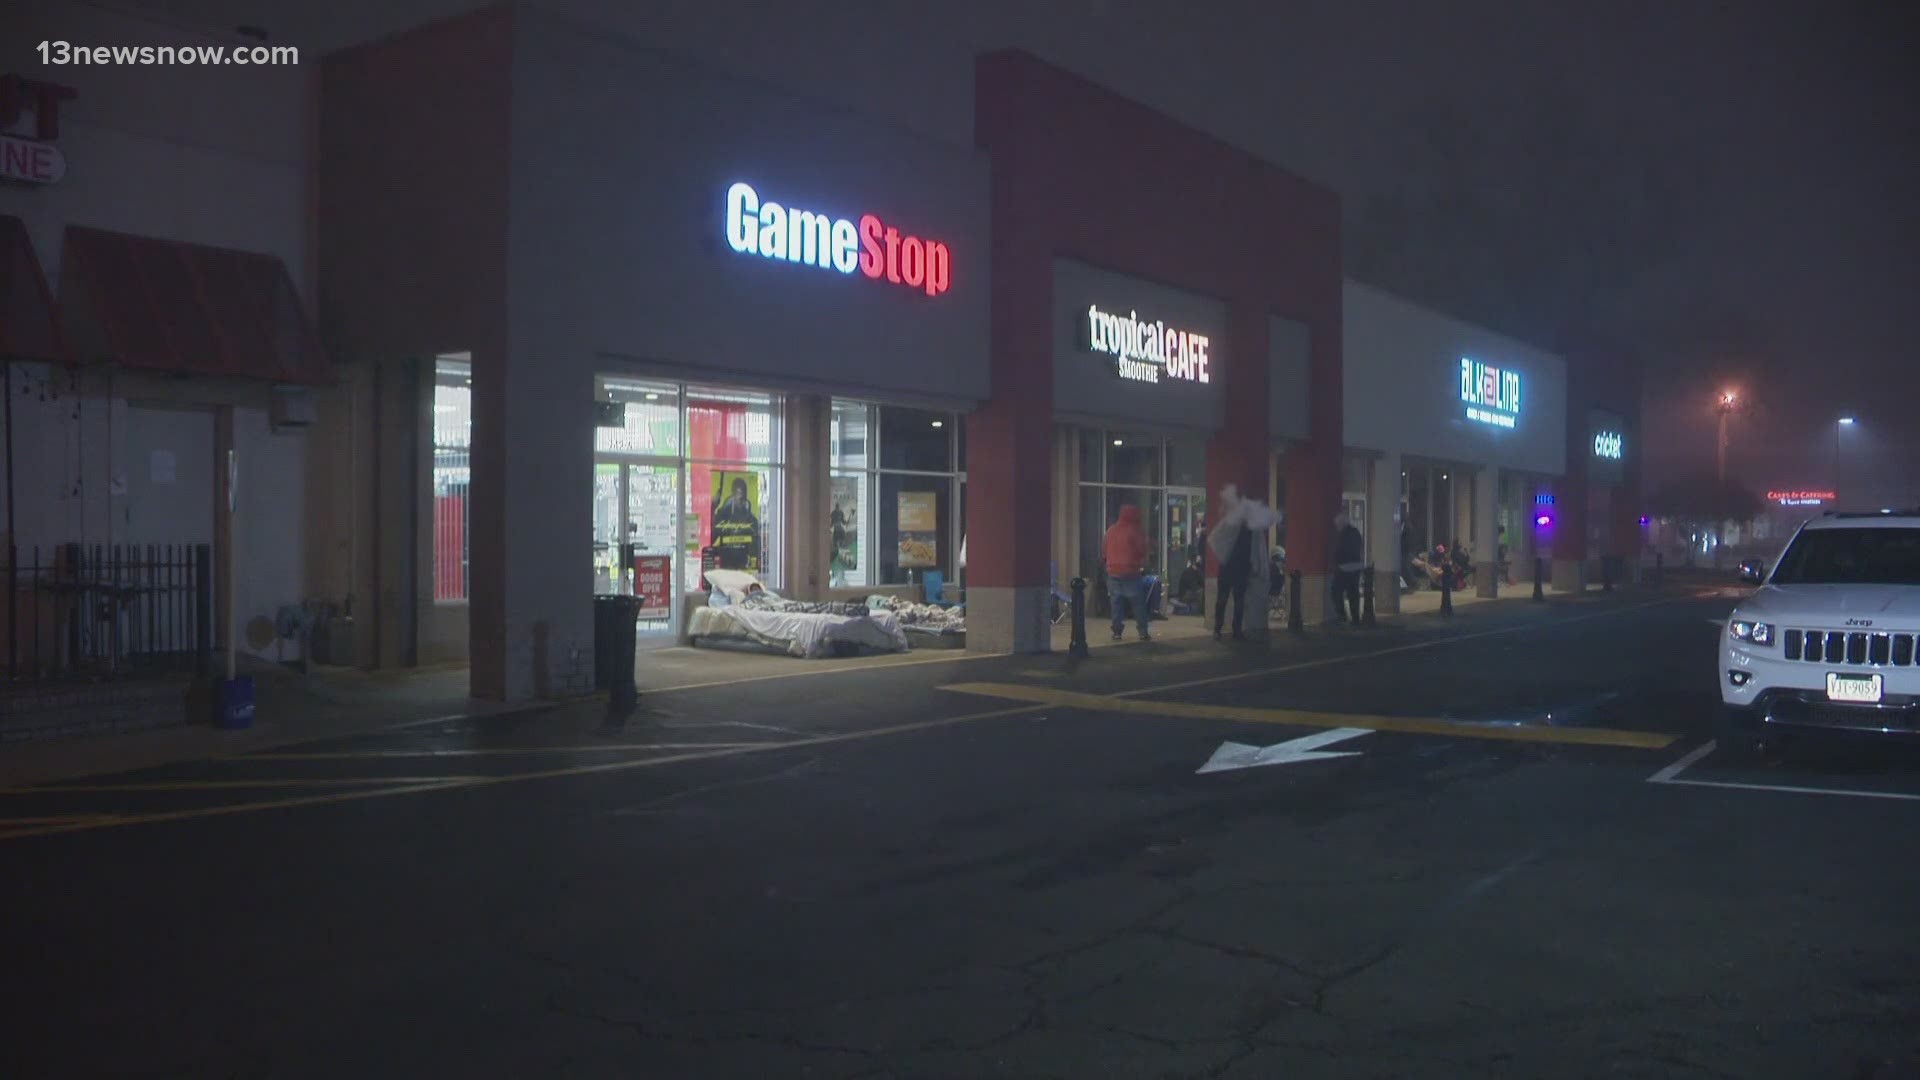 Two people spent the night in front of GameStop in the Ghent area of Norfolk for the new PlayStation, and they set up air-mattresses so they wouldn't miss the sale.